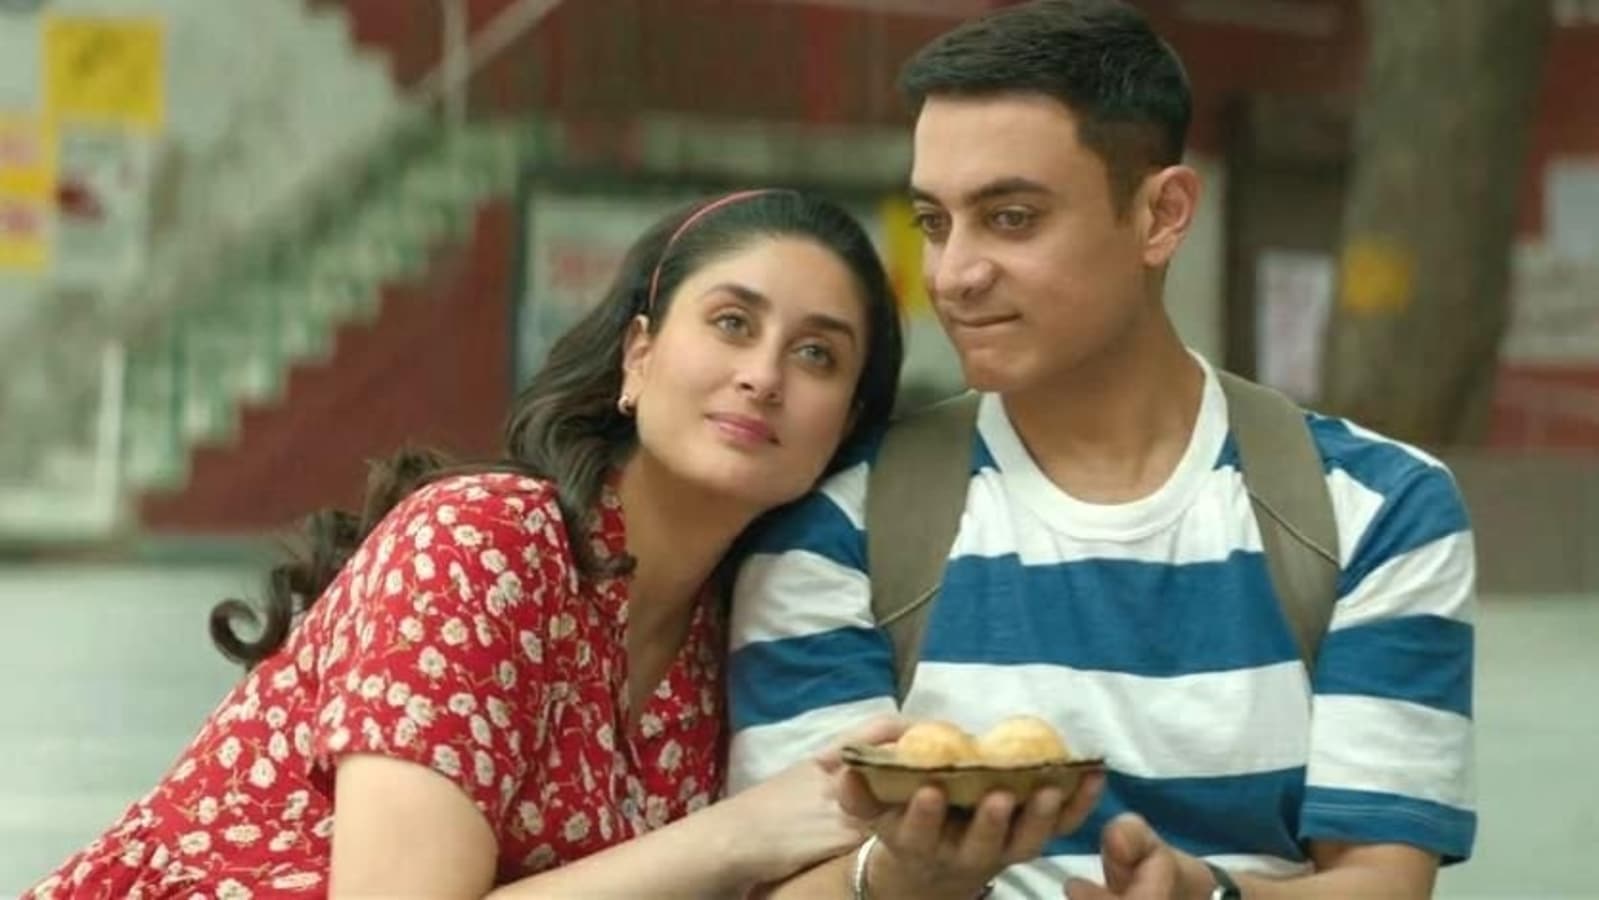 After failing at the box office, Aamir Khan’s Laal Singh Chaddha is now number 2 non-English film globally on Netflix